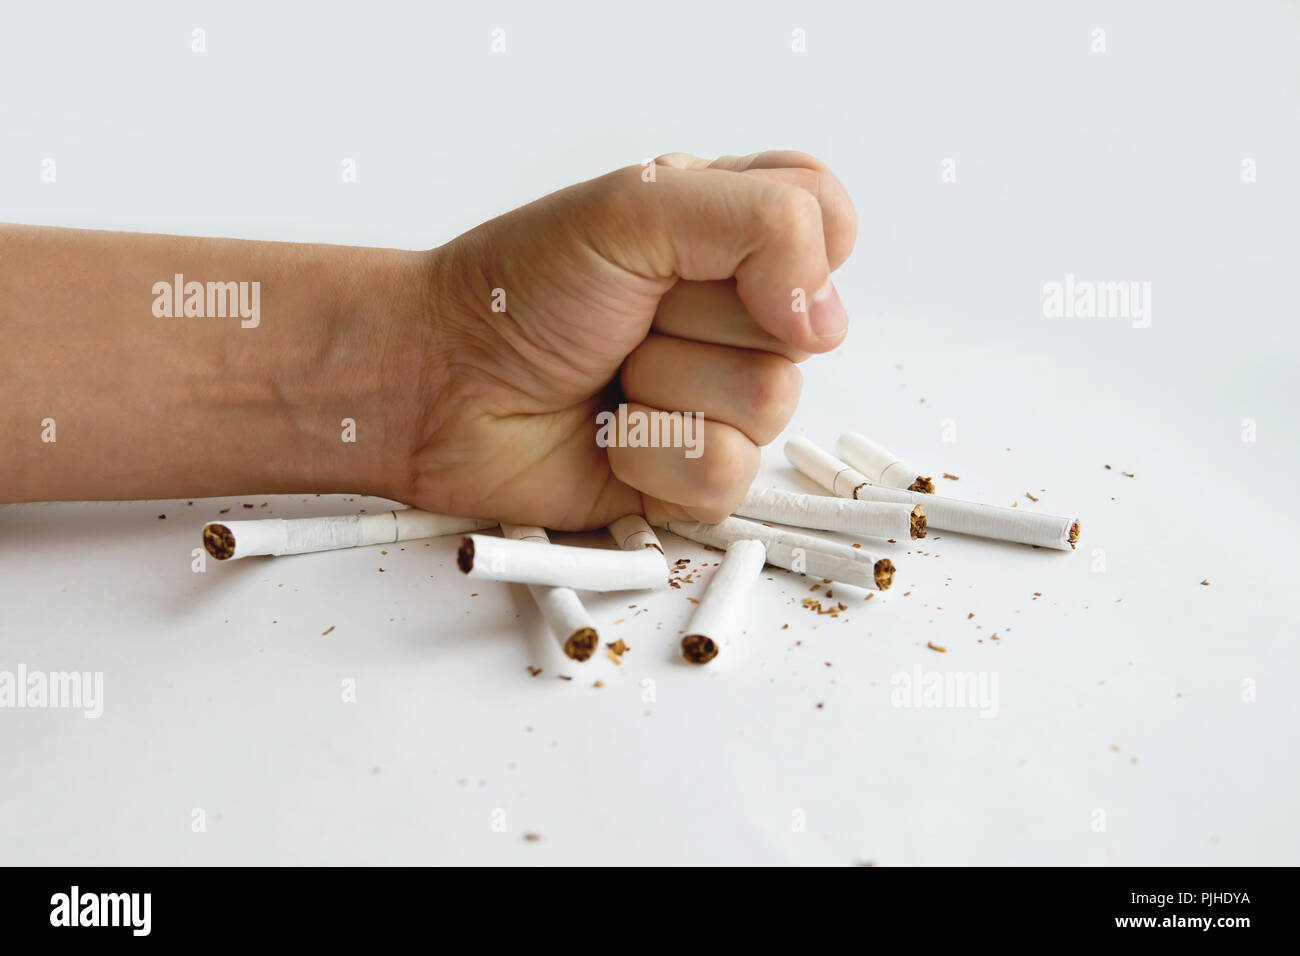 fist breaking cigarette stop smoking concept on white background. a fist smashes the cigarette. Stock Photo